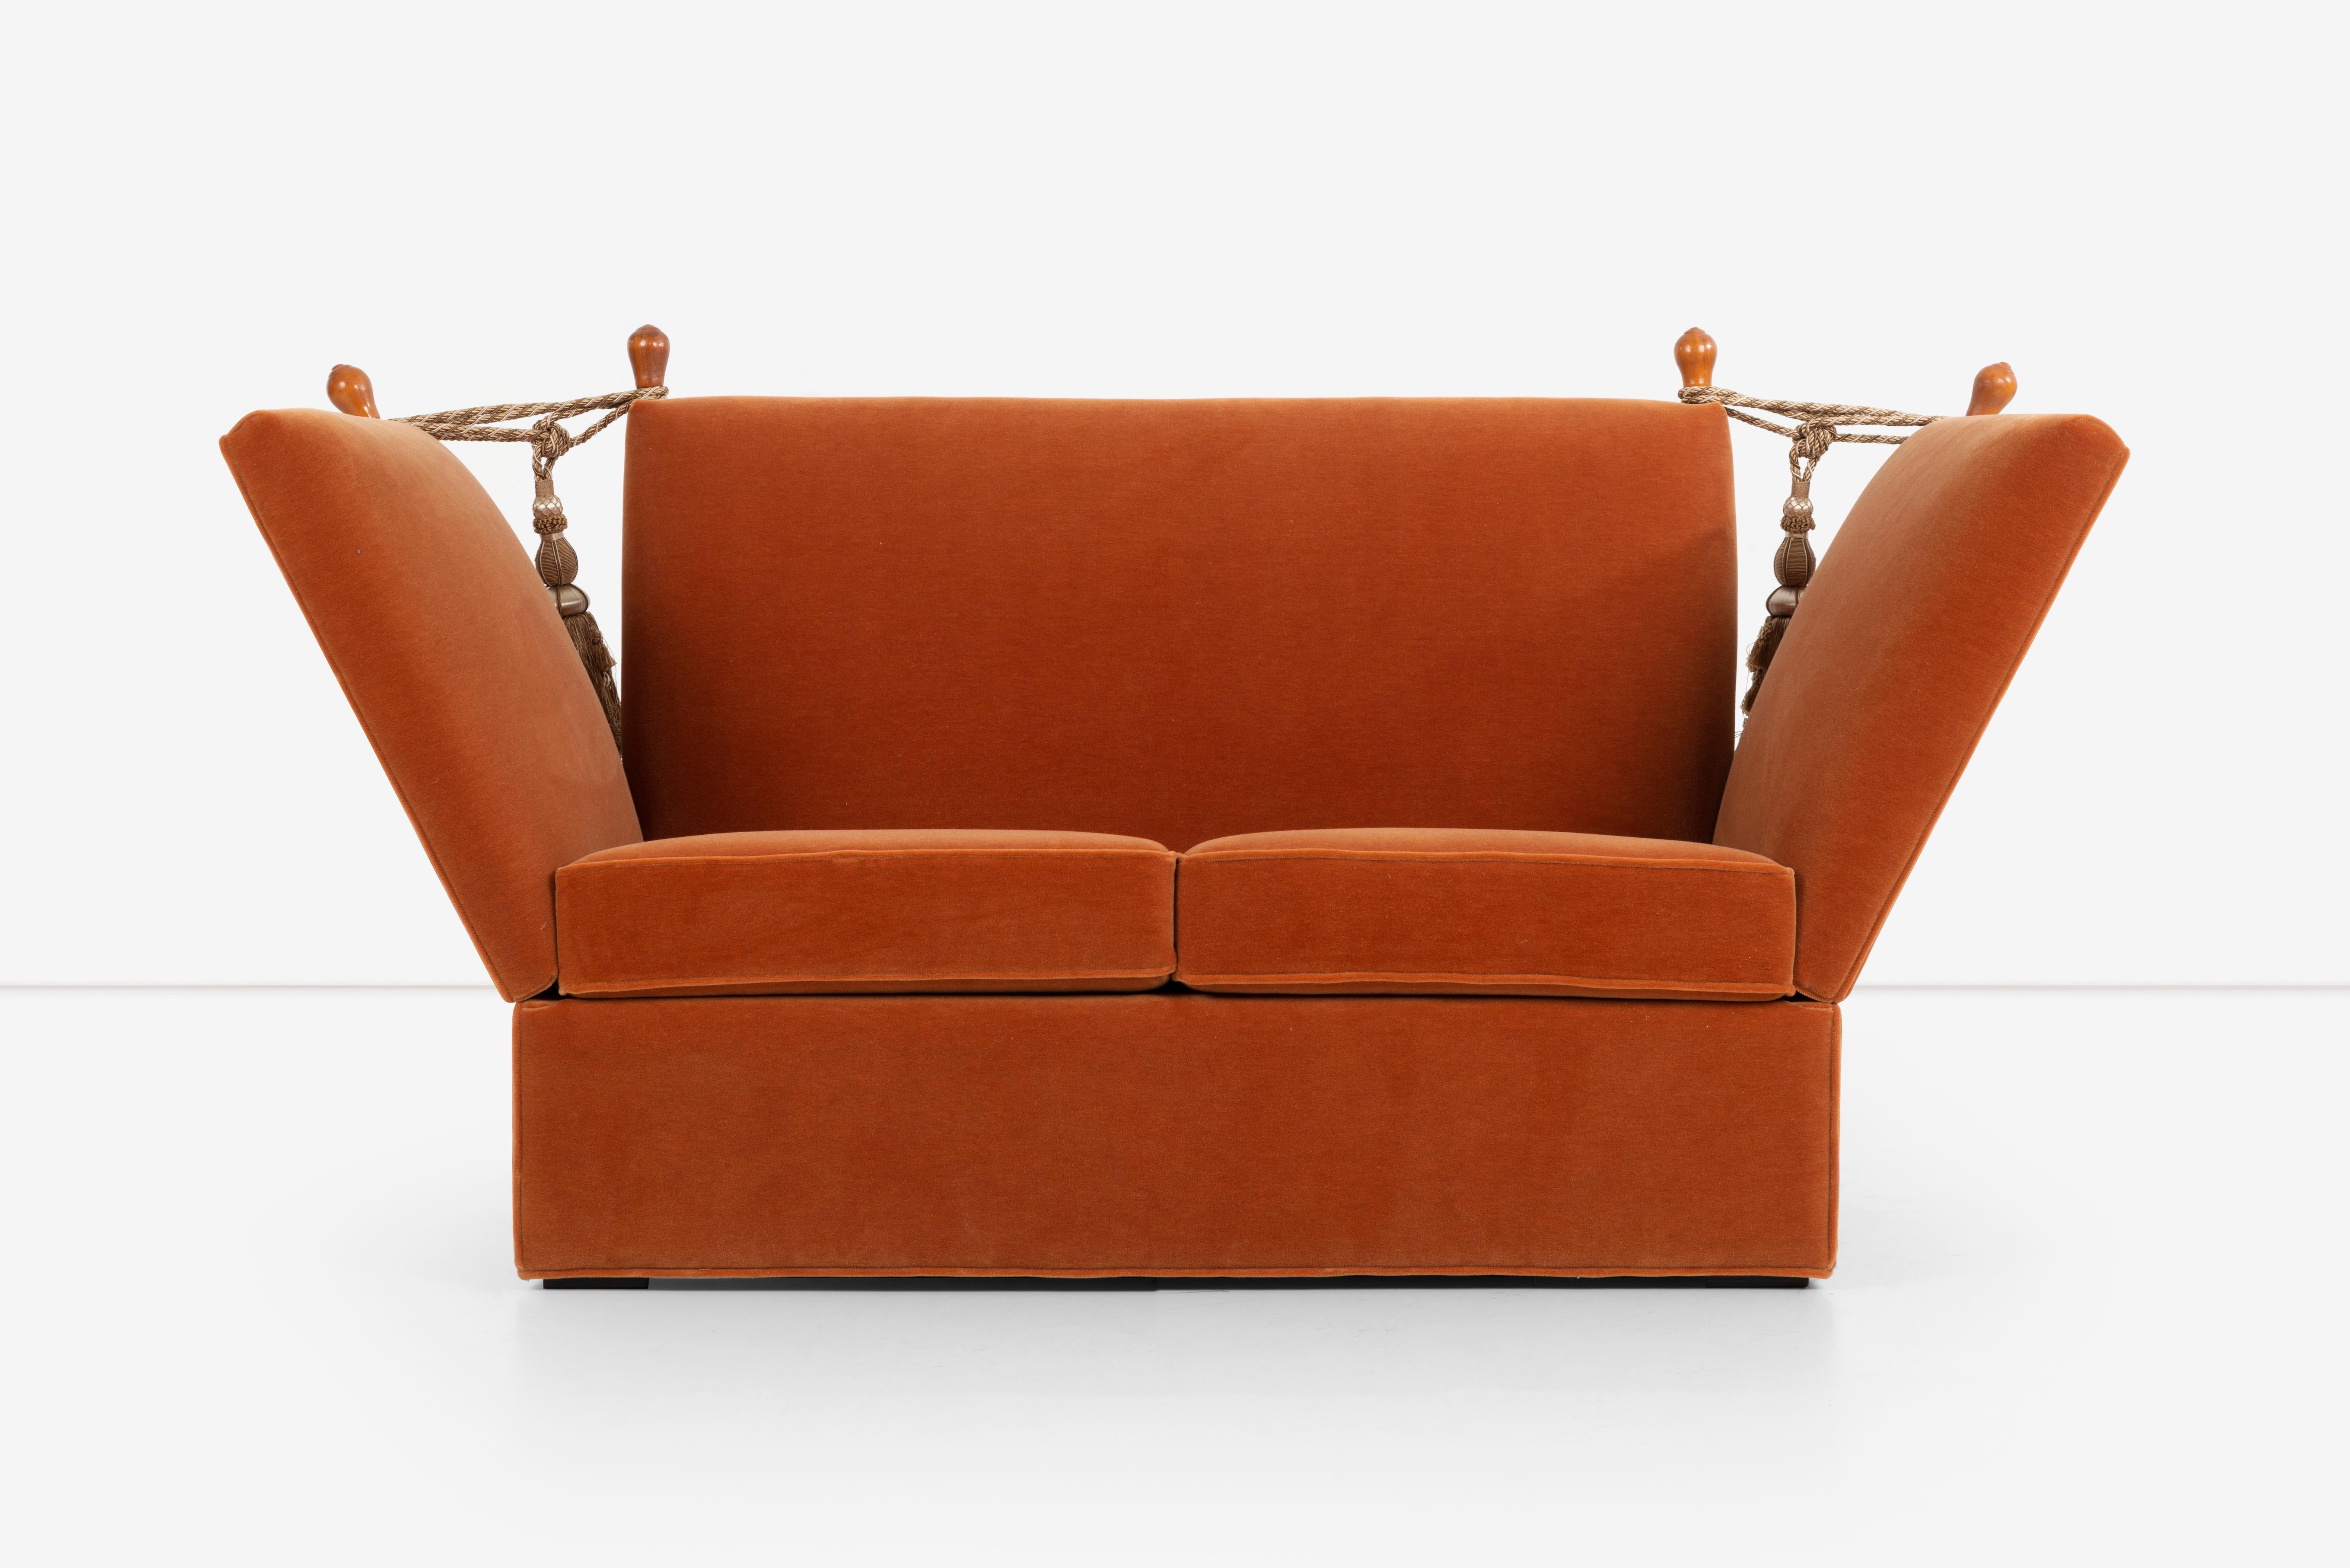 The Knole sofa is a classic English furniture piece that has been around since the 17th century. This particular Knole sofa, upholstered in burnt orange mohair, is a unique and stylish piece that is sure to make a statement in any room. The mohair